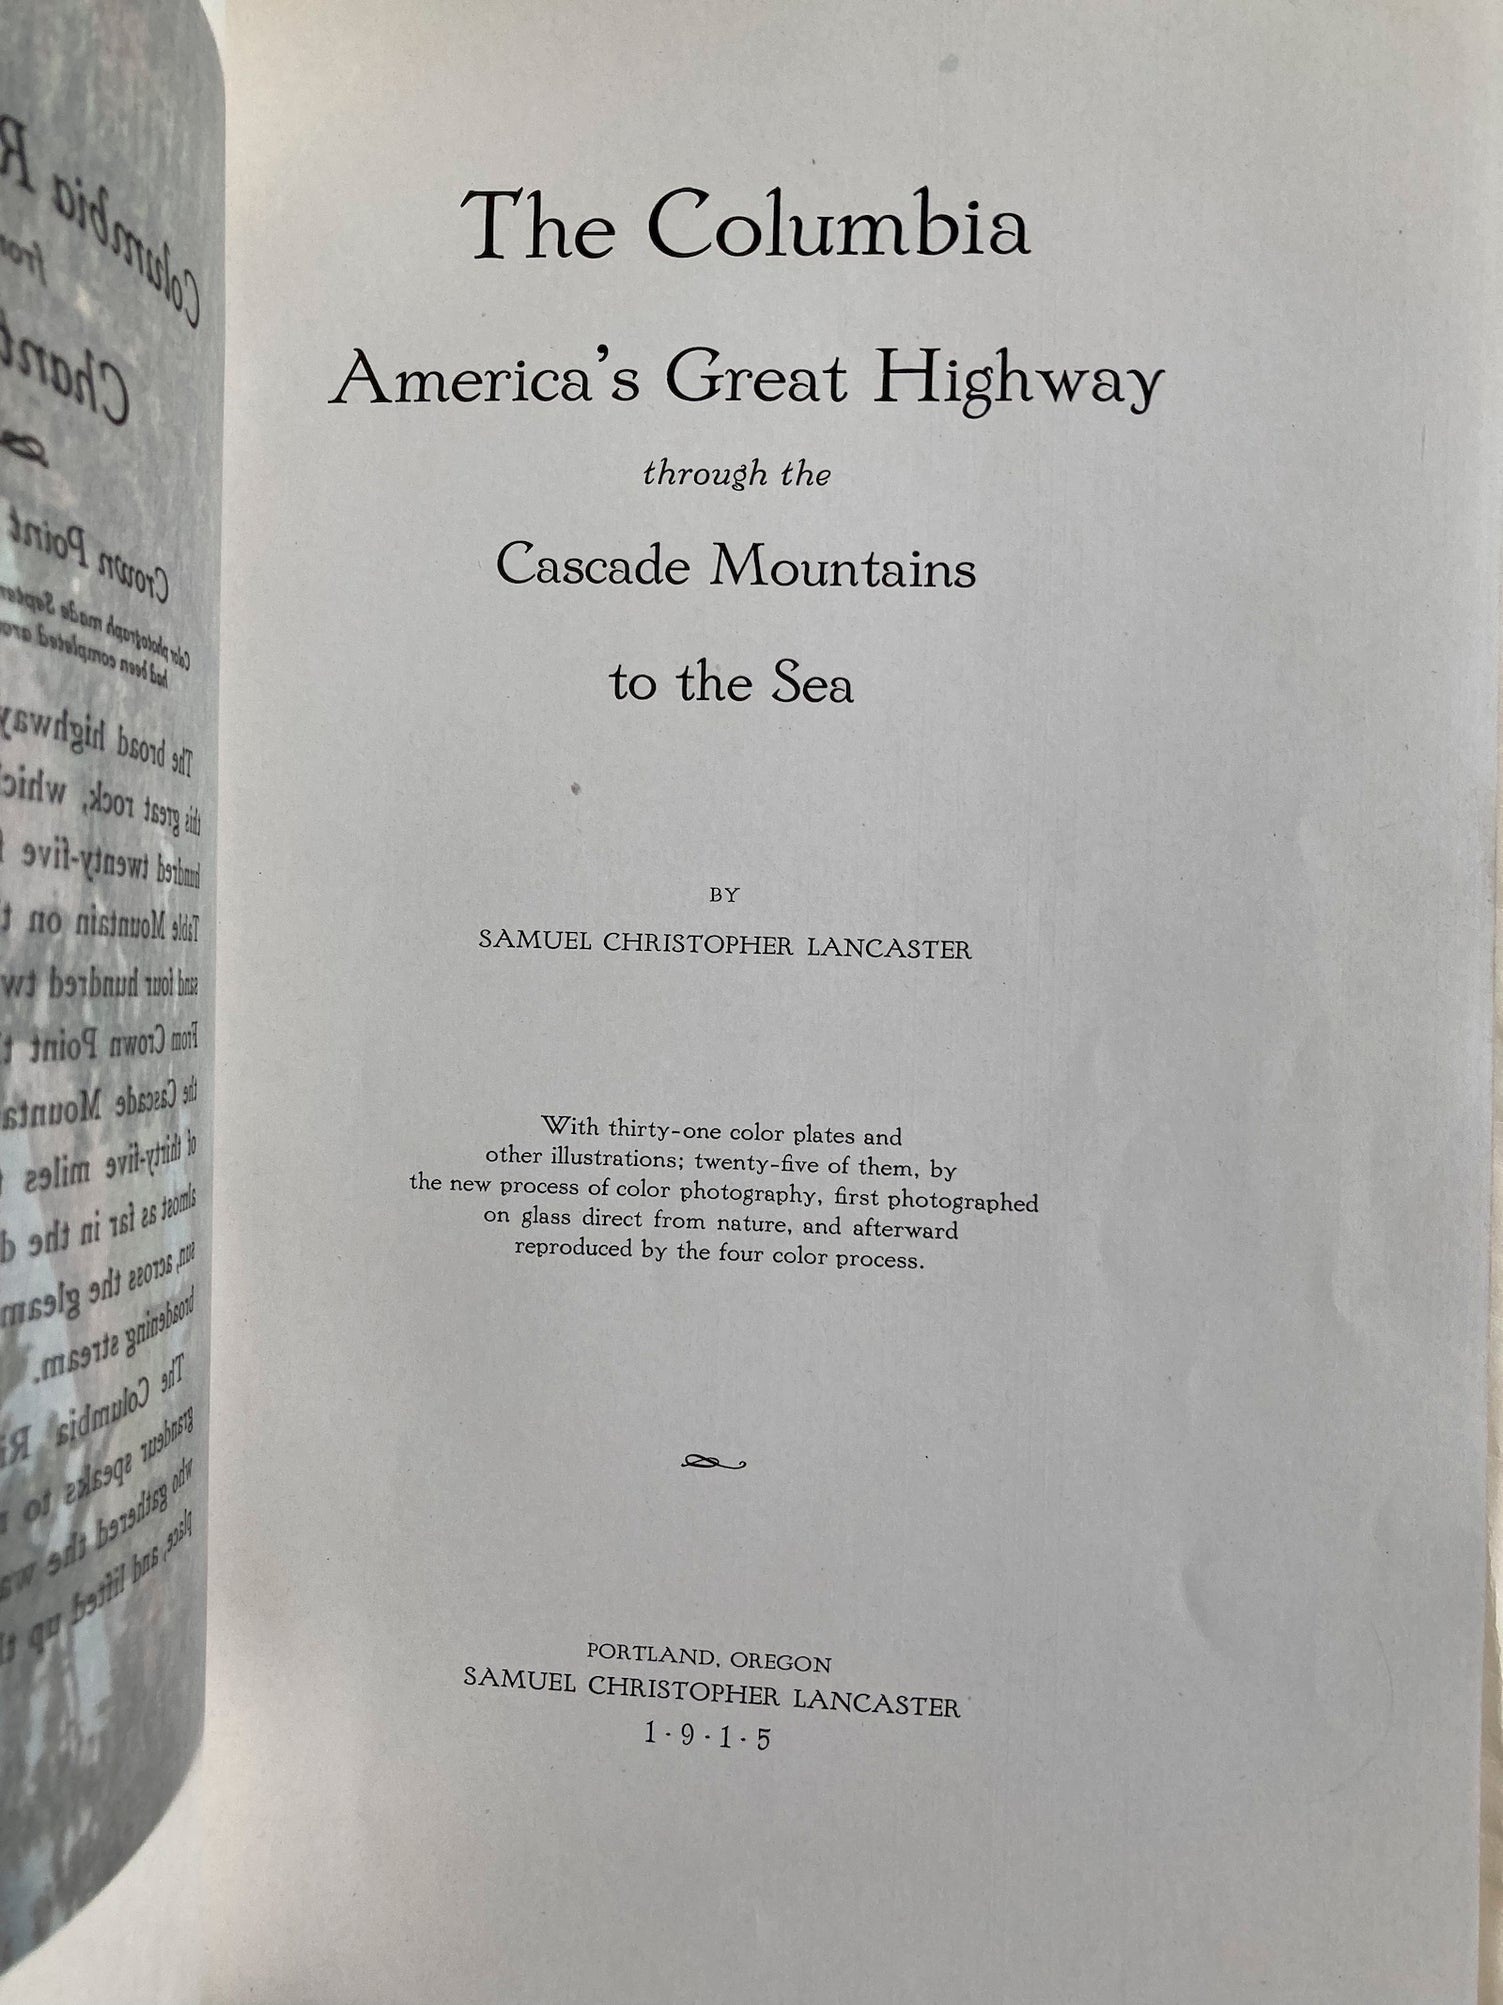 THE COLUMBIA AMERICA'S GREAT HIGHWAY 1st Ed  1915  Re-Bound